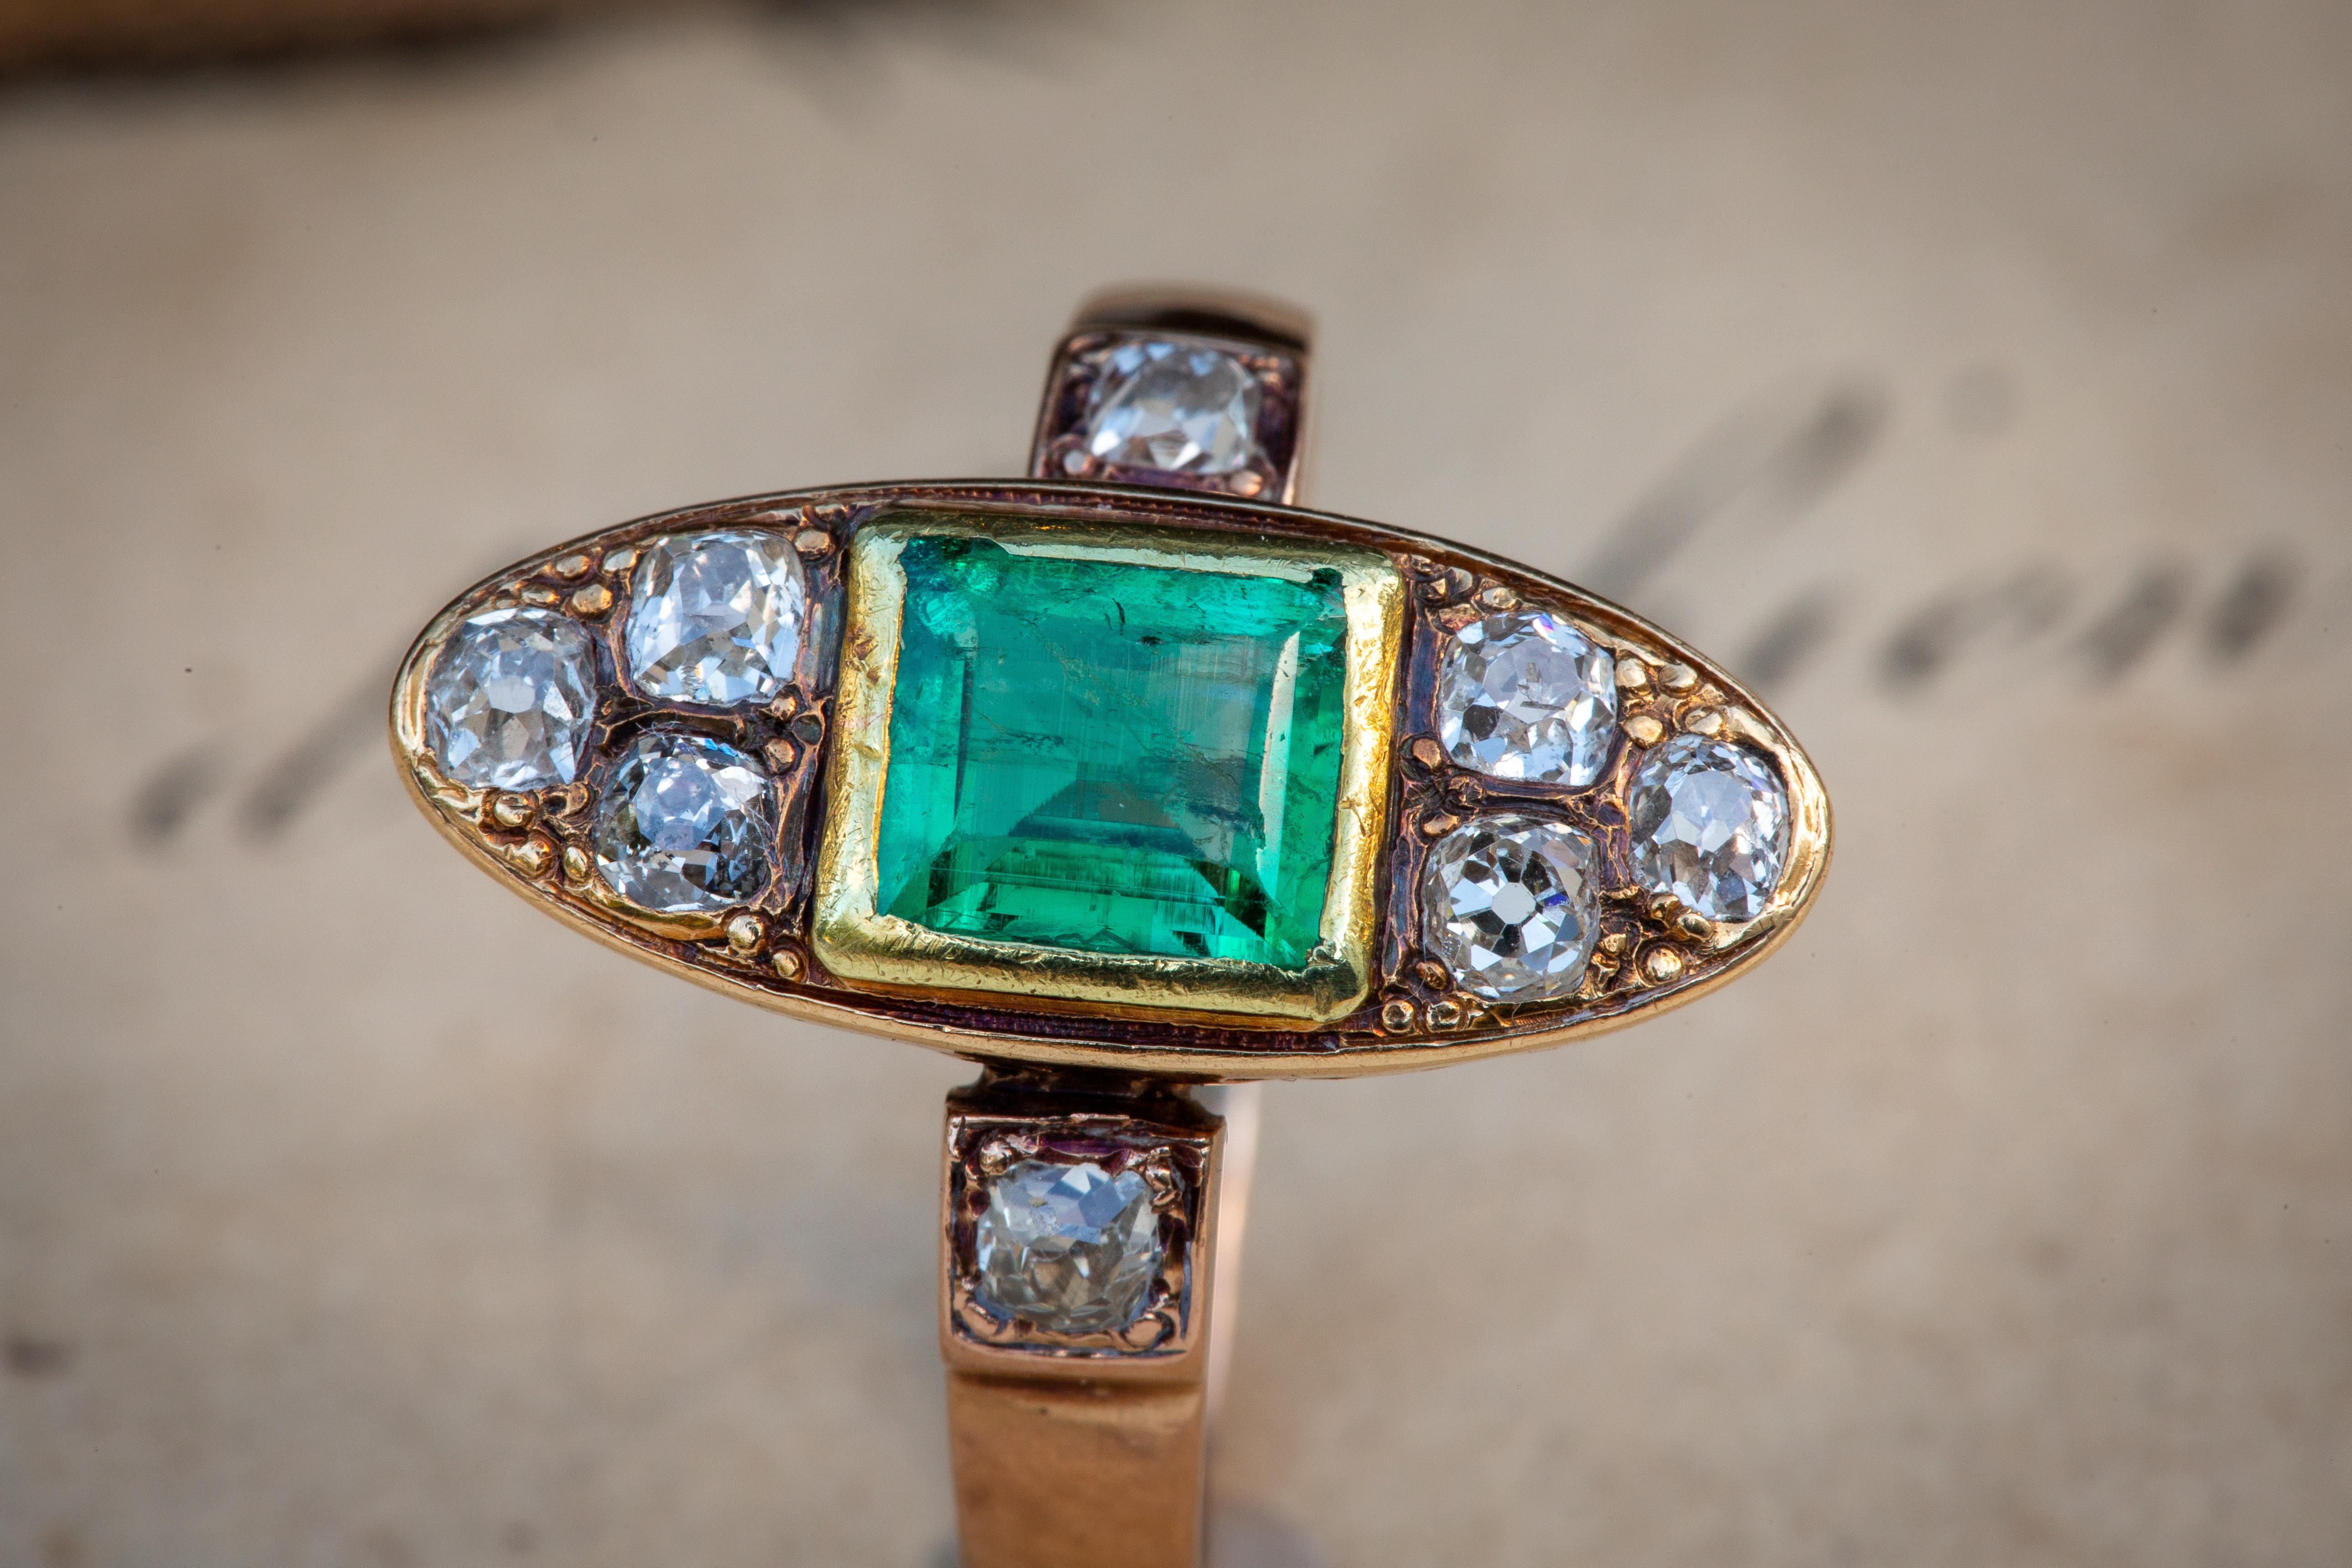 This stunning navette-shaped French gold ring dates to the second half of the 19th century. In the centre rests a rub-over bezel set and open-back natural emerald with a fantastic hue and saturation. It weighs approximately 0.7ct and is likely to be